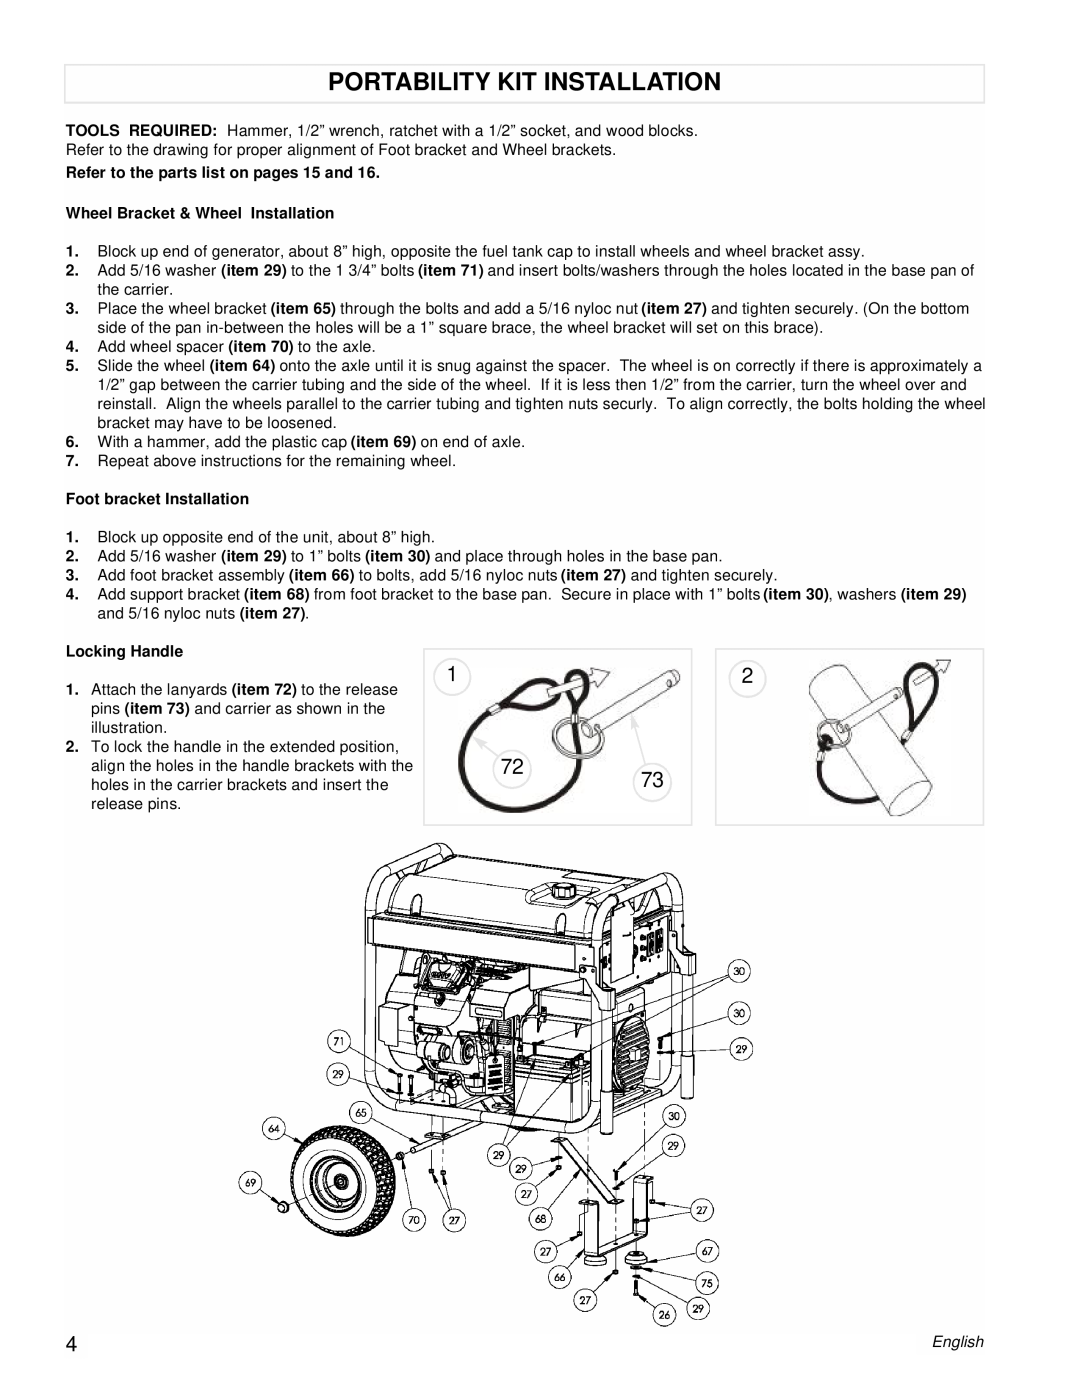 Powermate PMC601200 manual Portability Kit Installation, Refer to the parts list on pages 15 and, Foot bracket Installation 